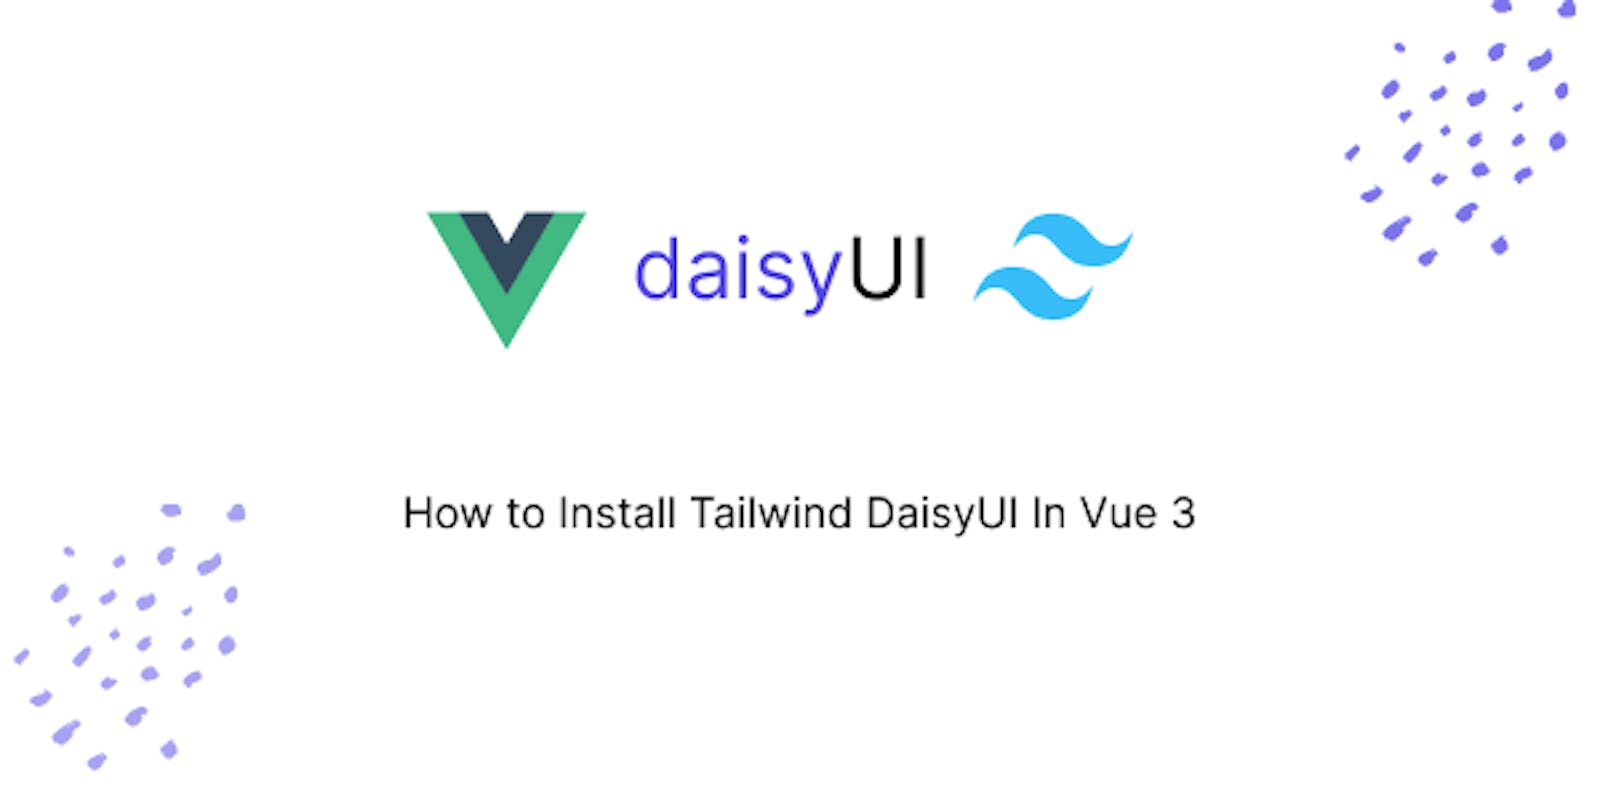 How to add Tailwind DaisyUI In Vue 3